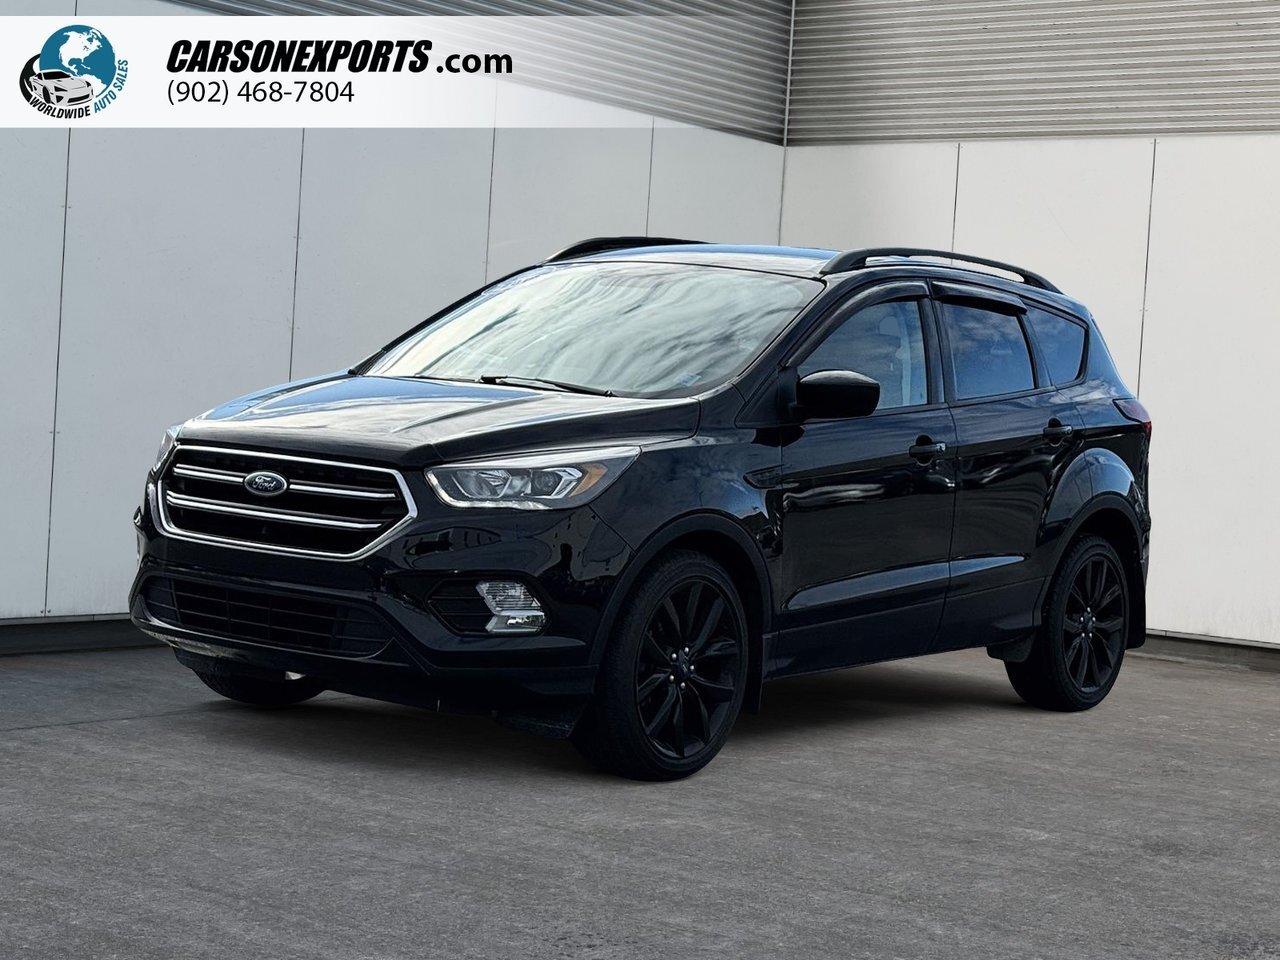 2019 Ford Escape SE The best place to buy a used car. Period.